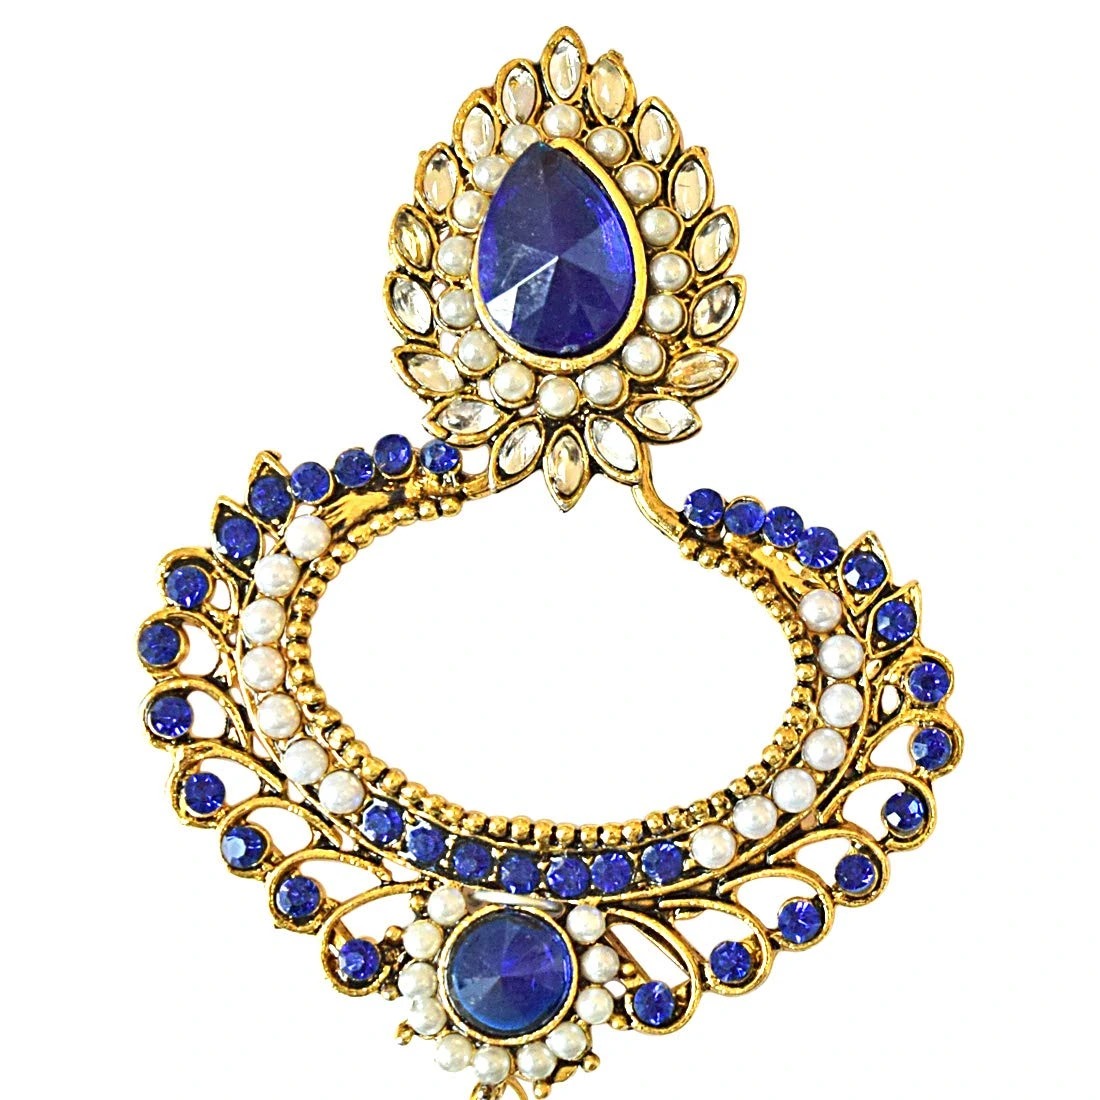 Drop Shaped Blue & white Coloure Stones, Shell Pearl & Gold Plated Ch Bali Earrings